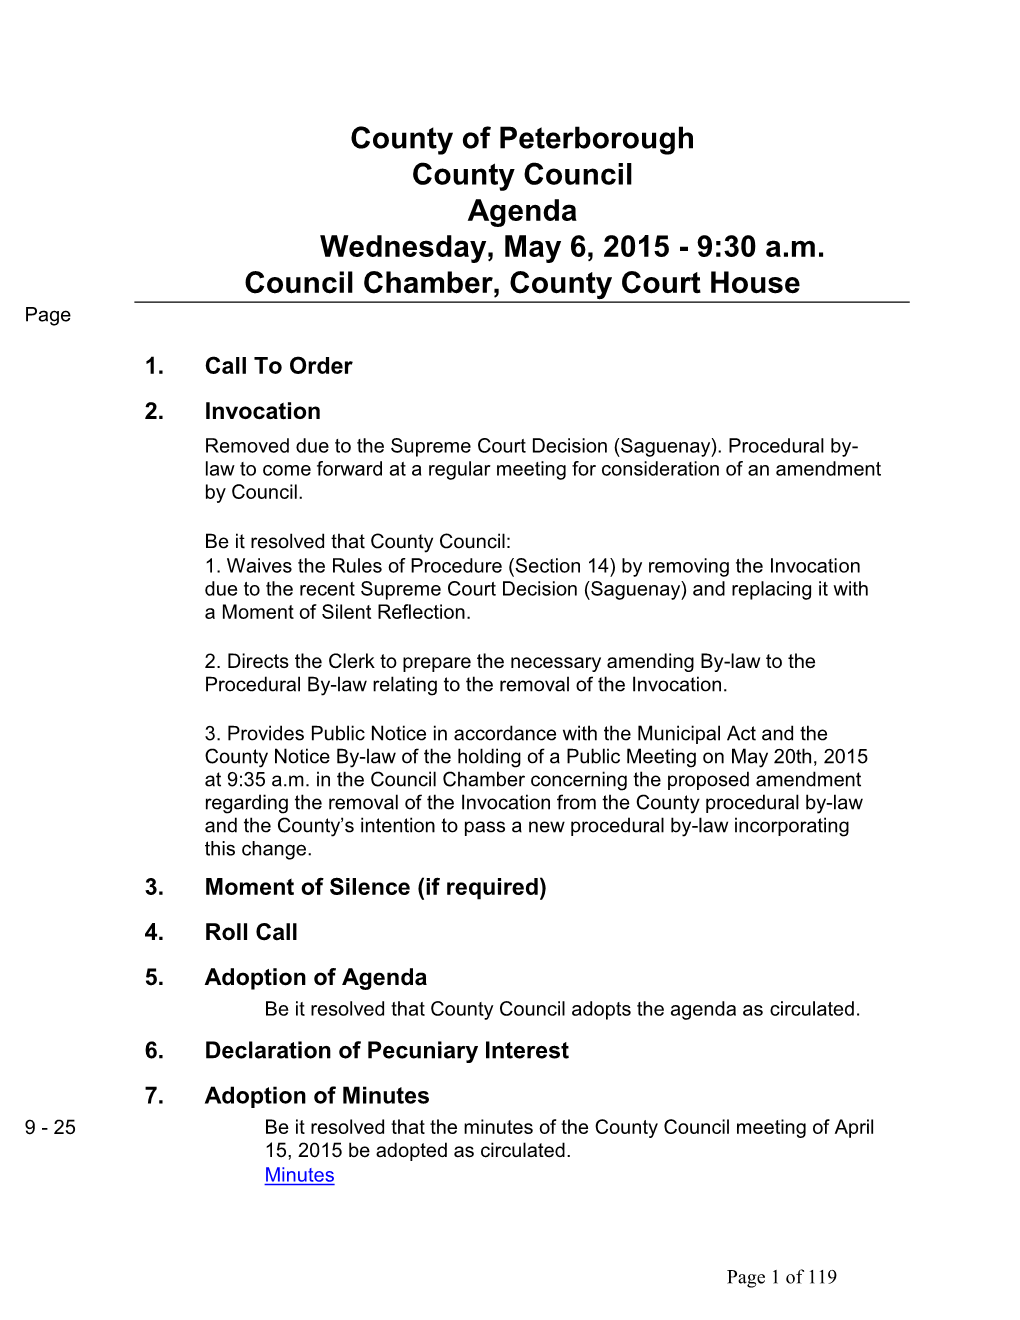 County Council Agenda Wednesday, May 6, 2015 - 9:30 A.M